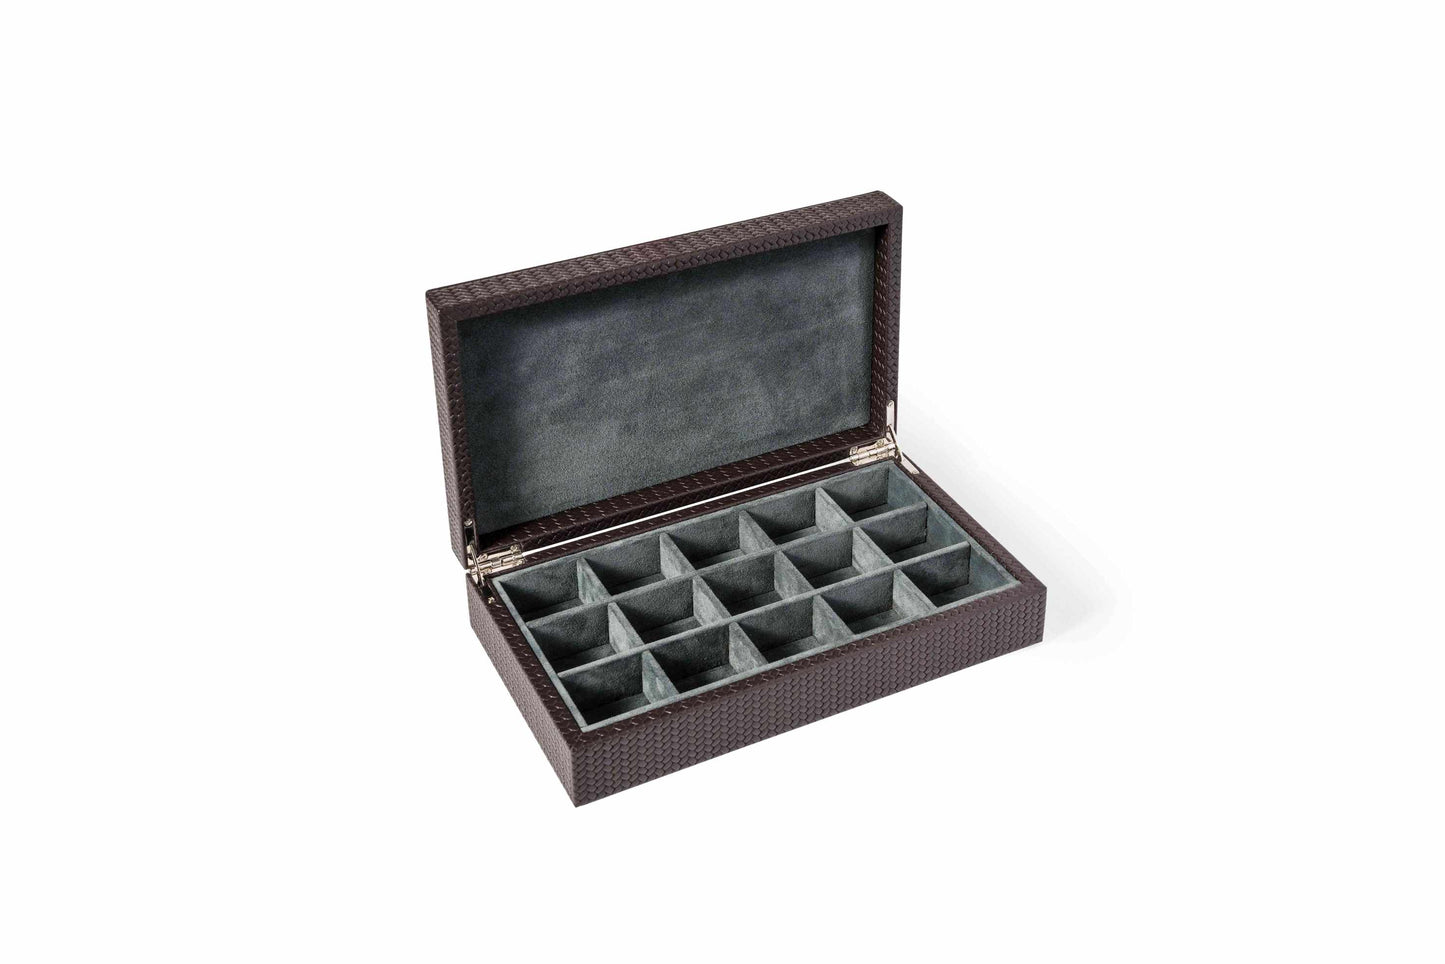 Leather-Covered Cufflinks Box With Lid And Suede Lining